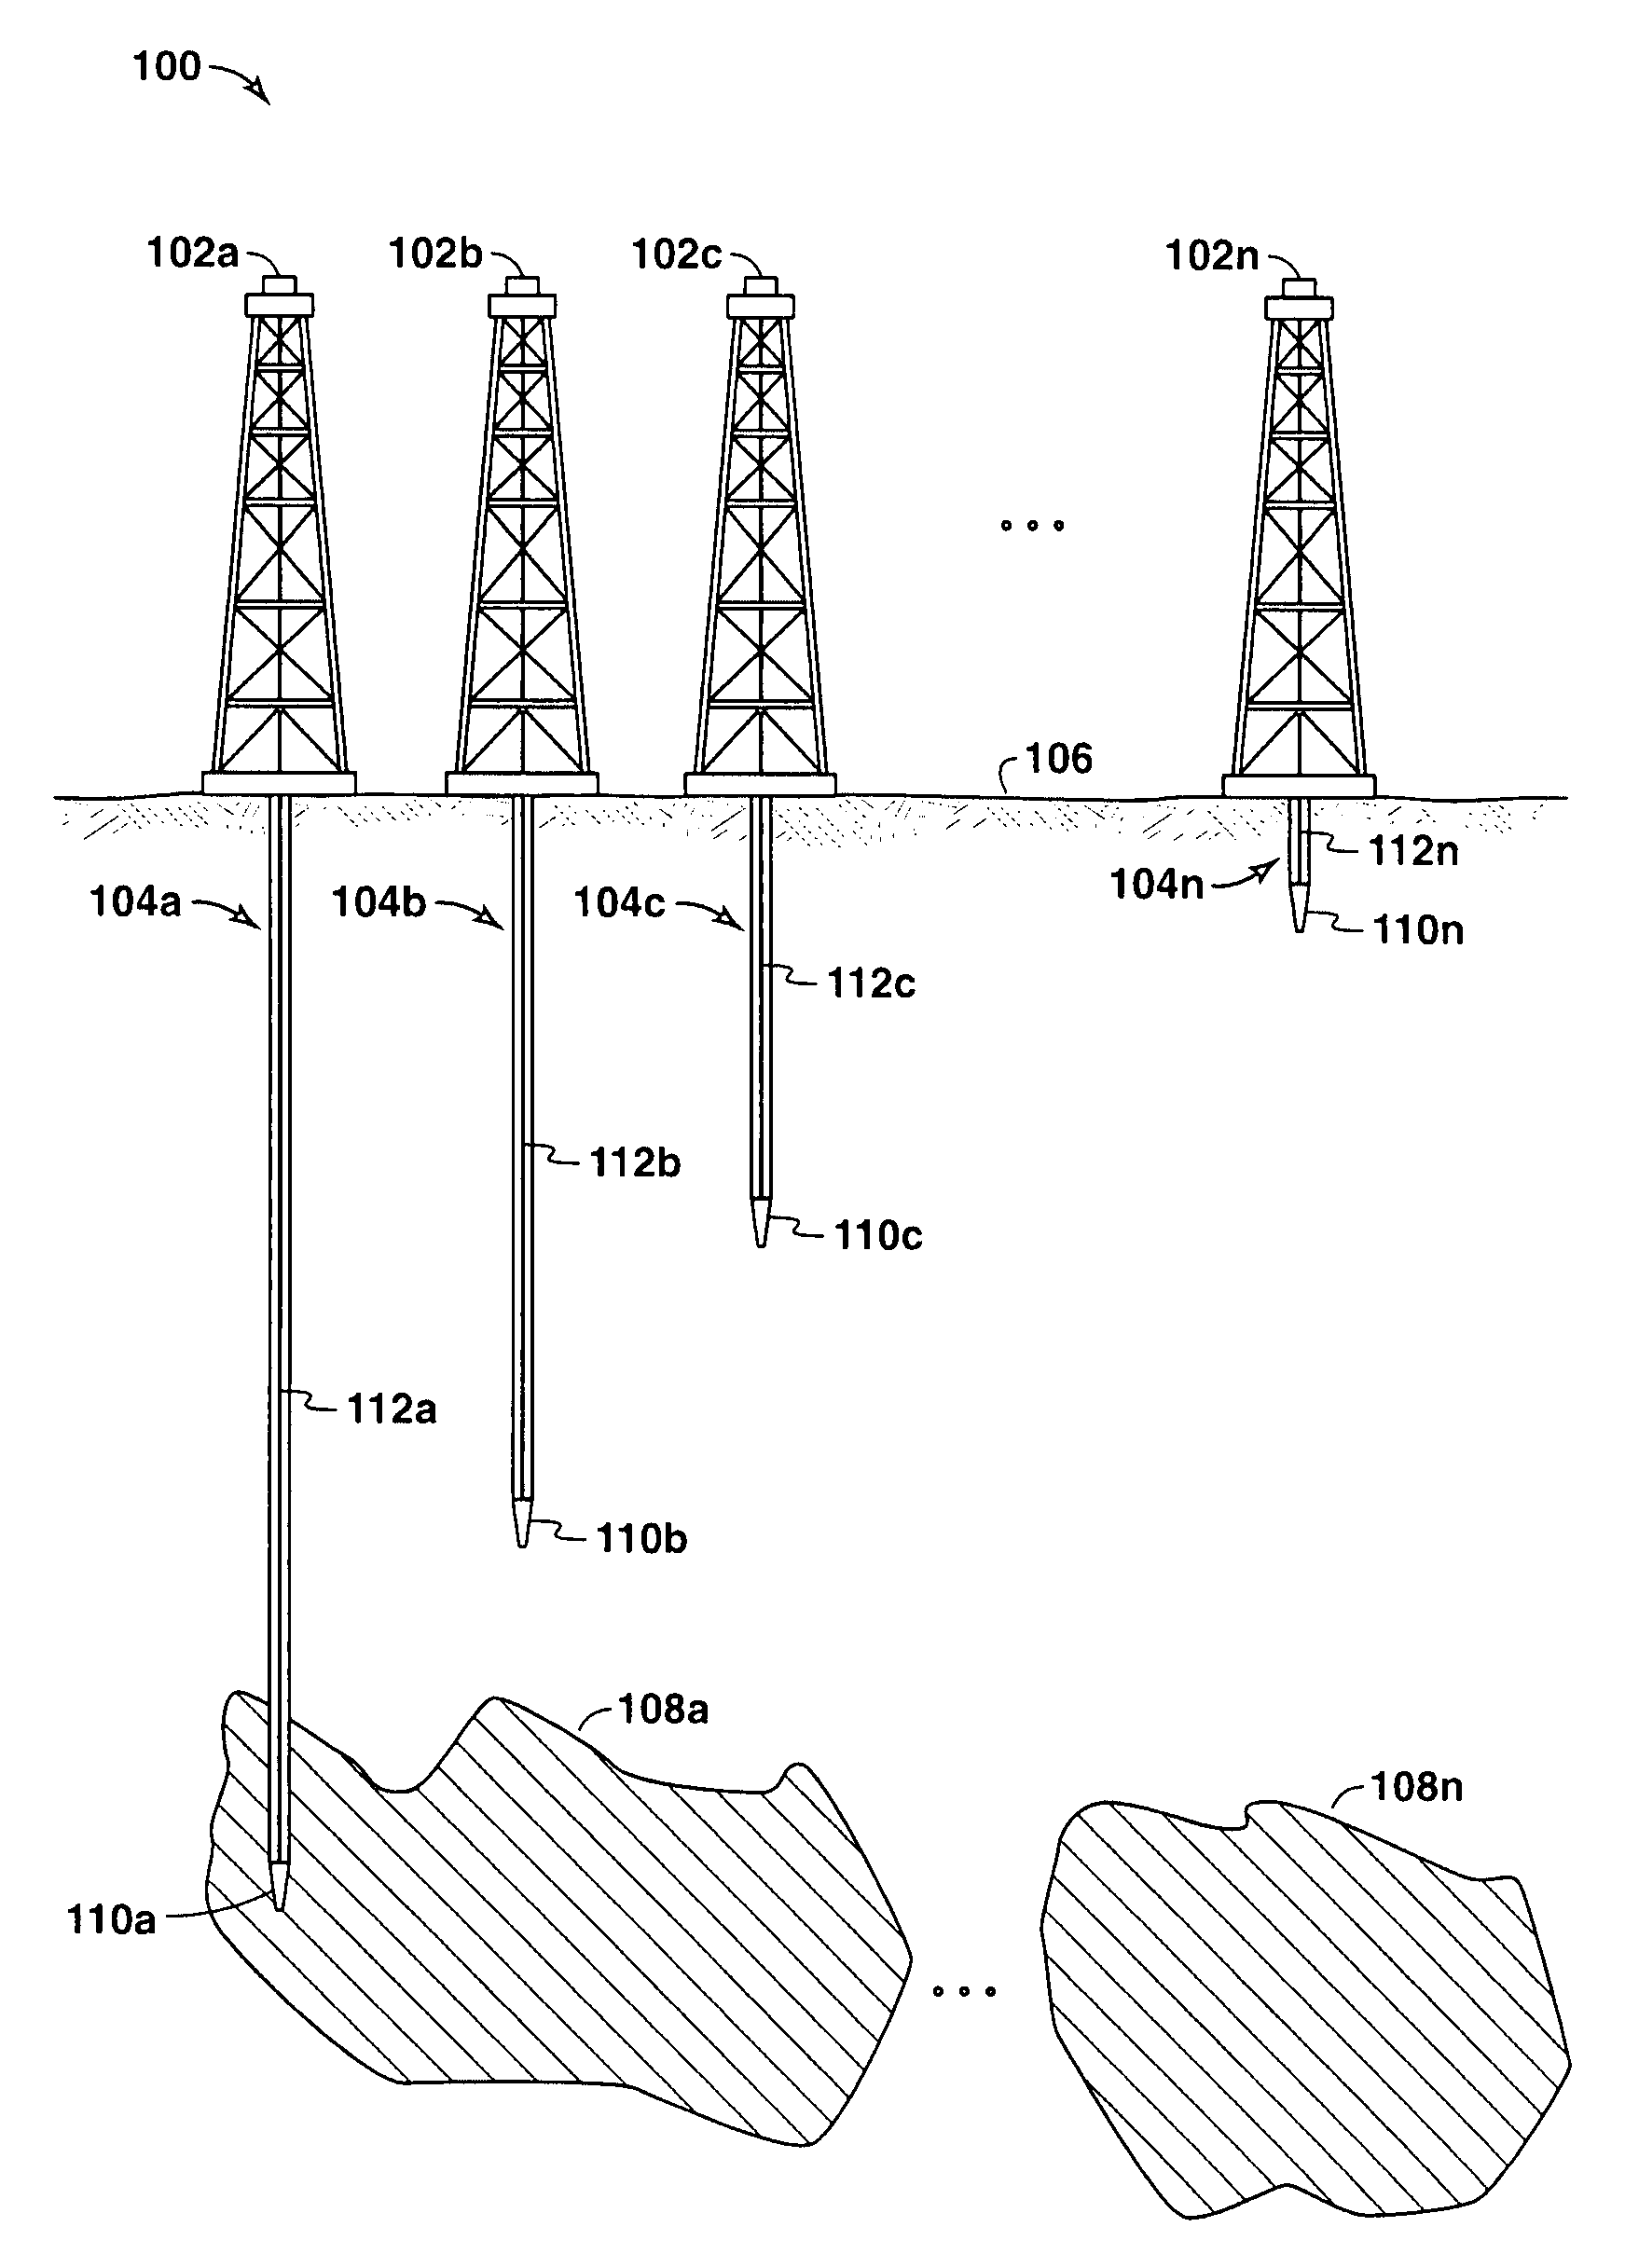 Method of drilling and producing hydrocarbons from subsurface formations